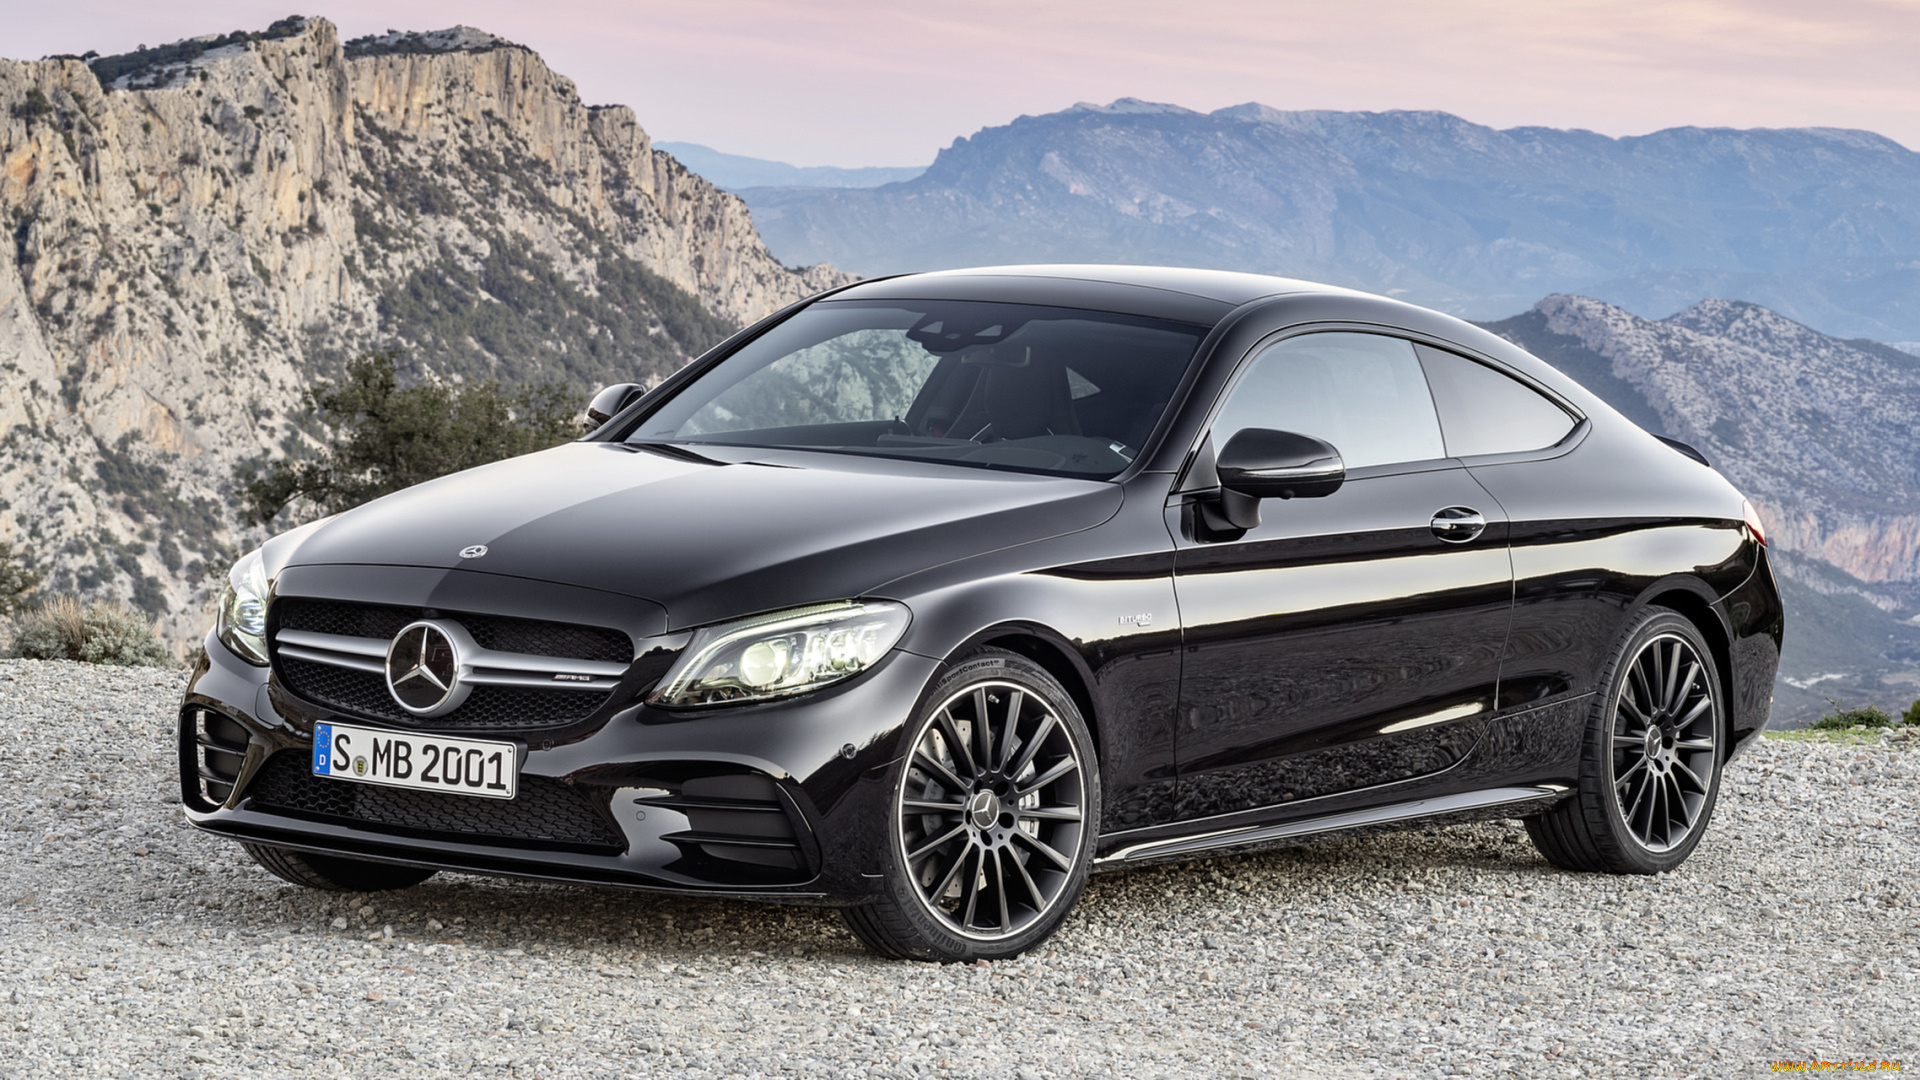 mercedes-benz, amg, c43, coupe, 4matic, night, package, 2019, автомобили, mercedes-benz, c43, coupe, 4matic, night, amg, carbon, package, 2019